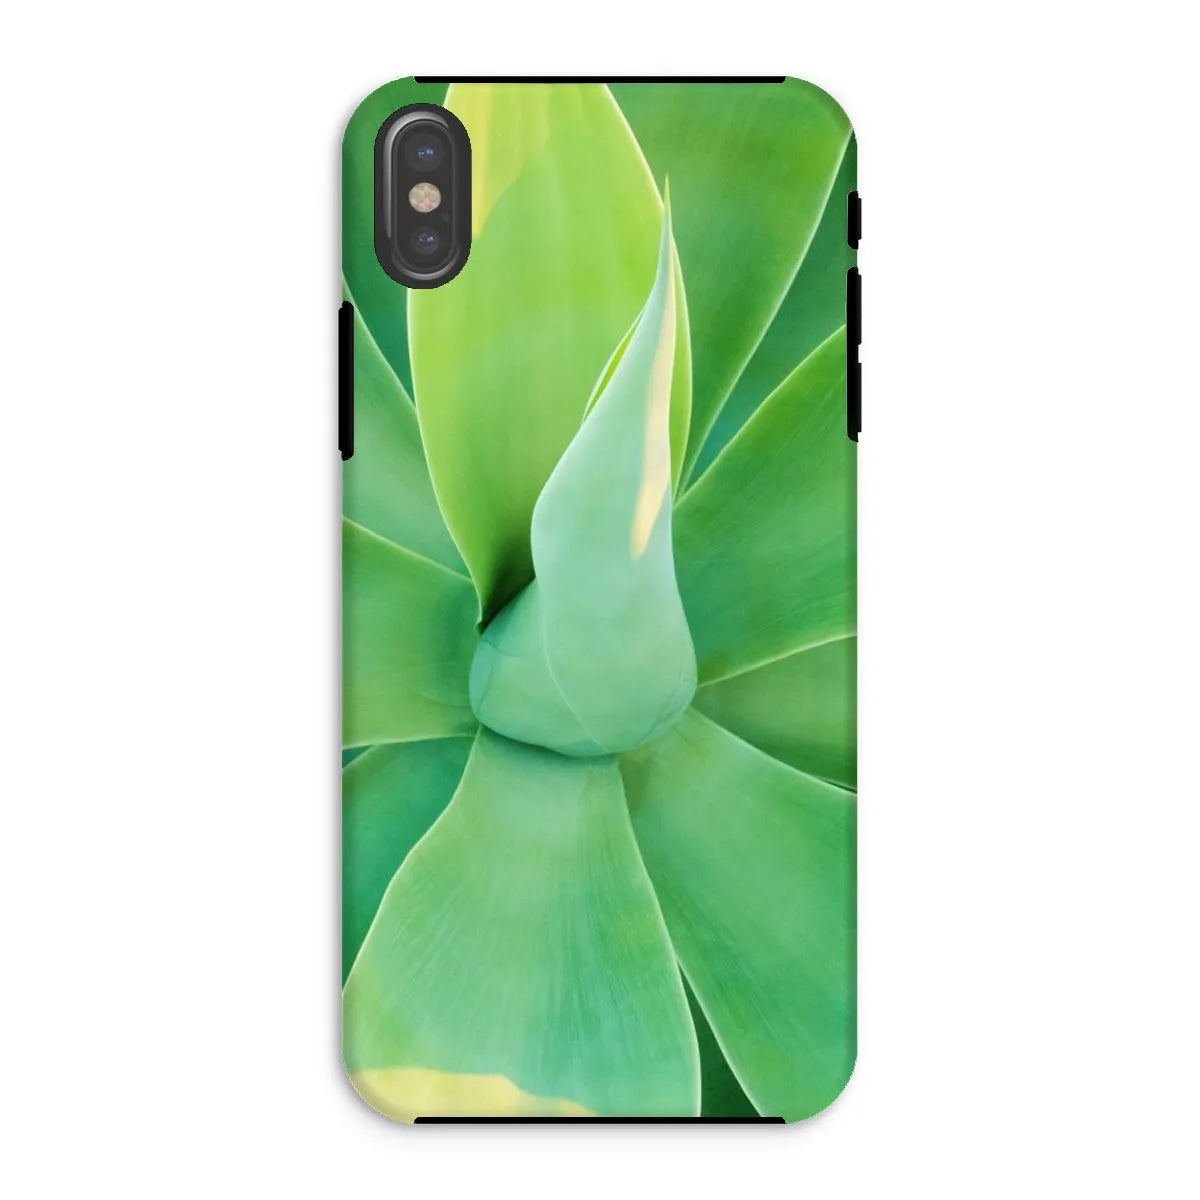 In Bloom Too Tough Phone Case - Iphone Xs / Matte - Mobile Phone Cases - Aesthetic Art